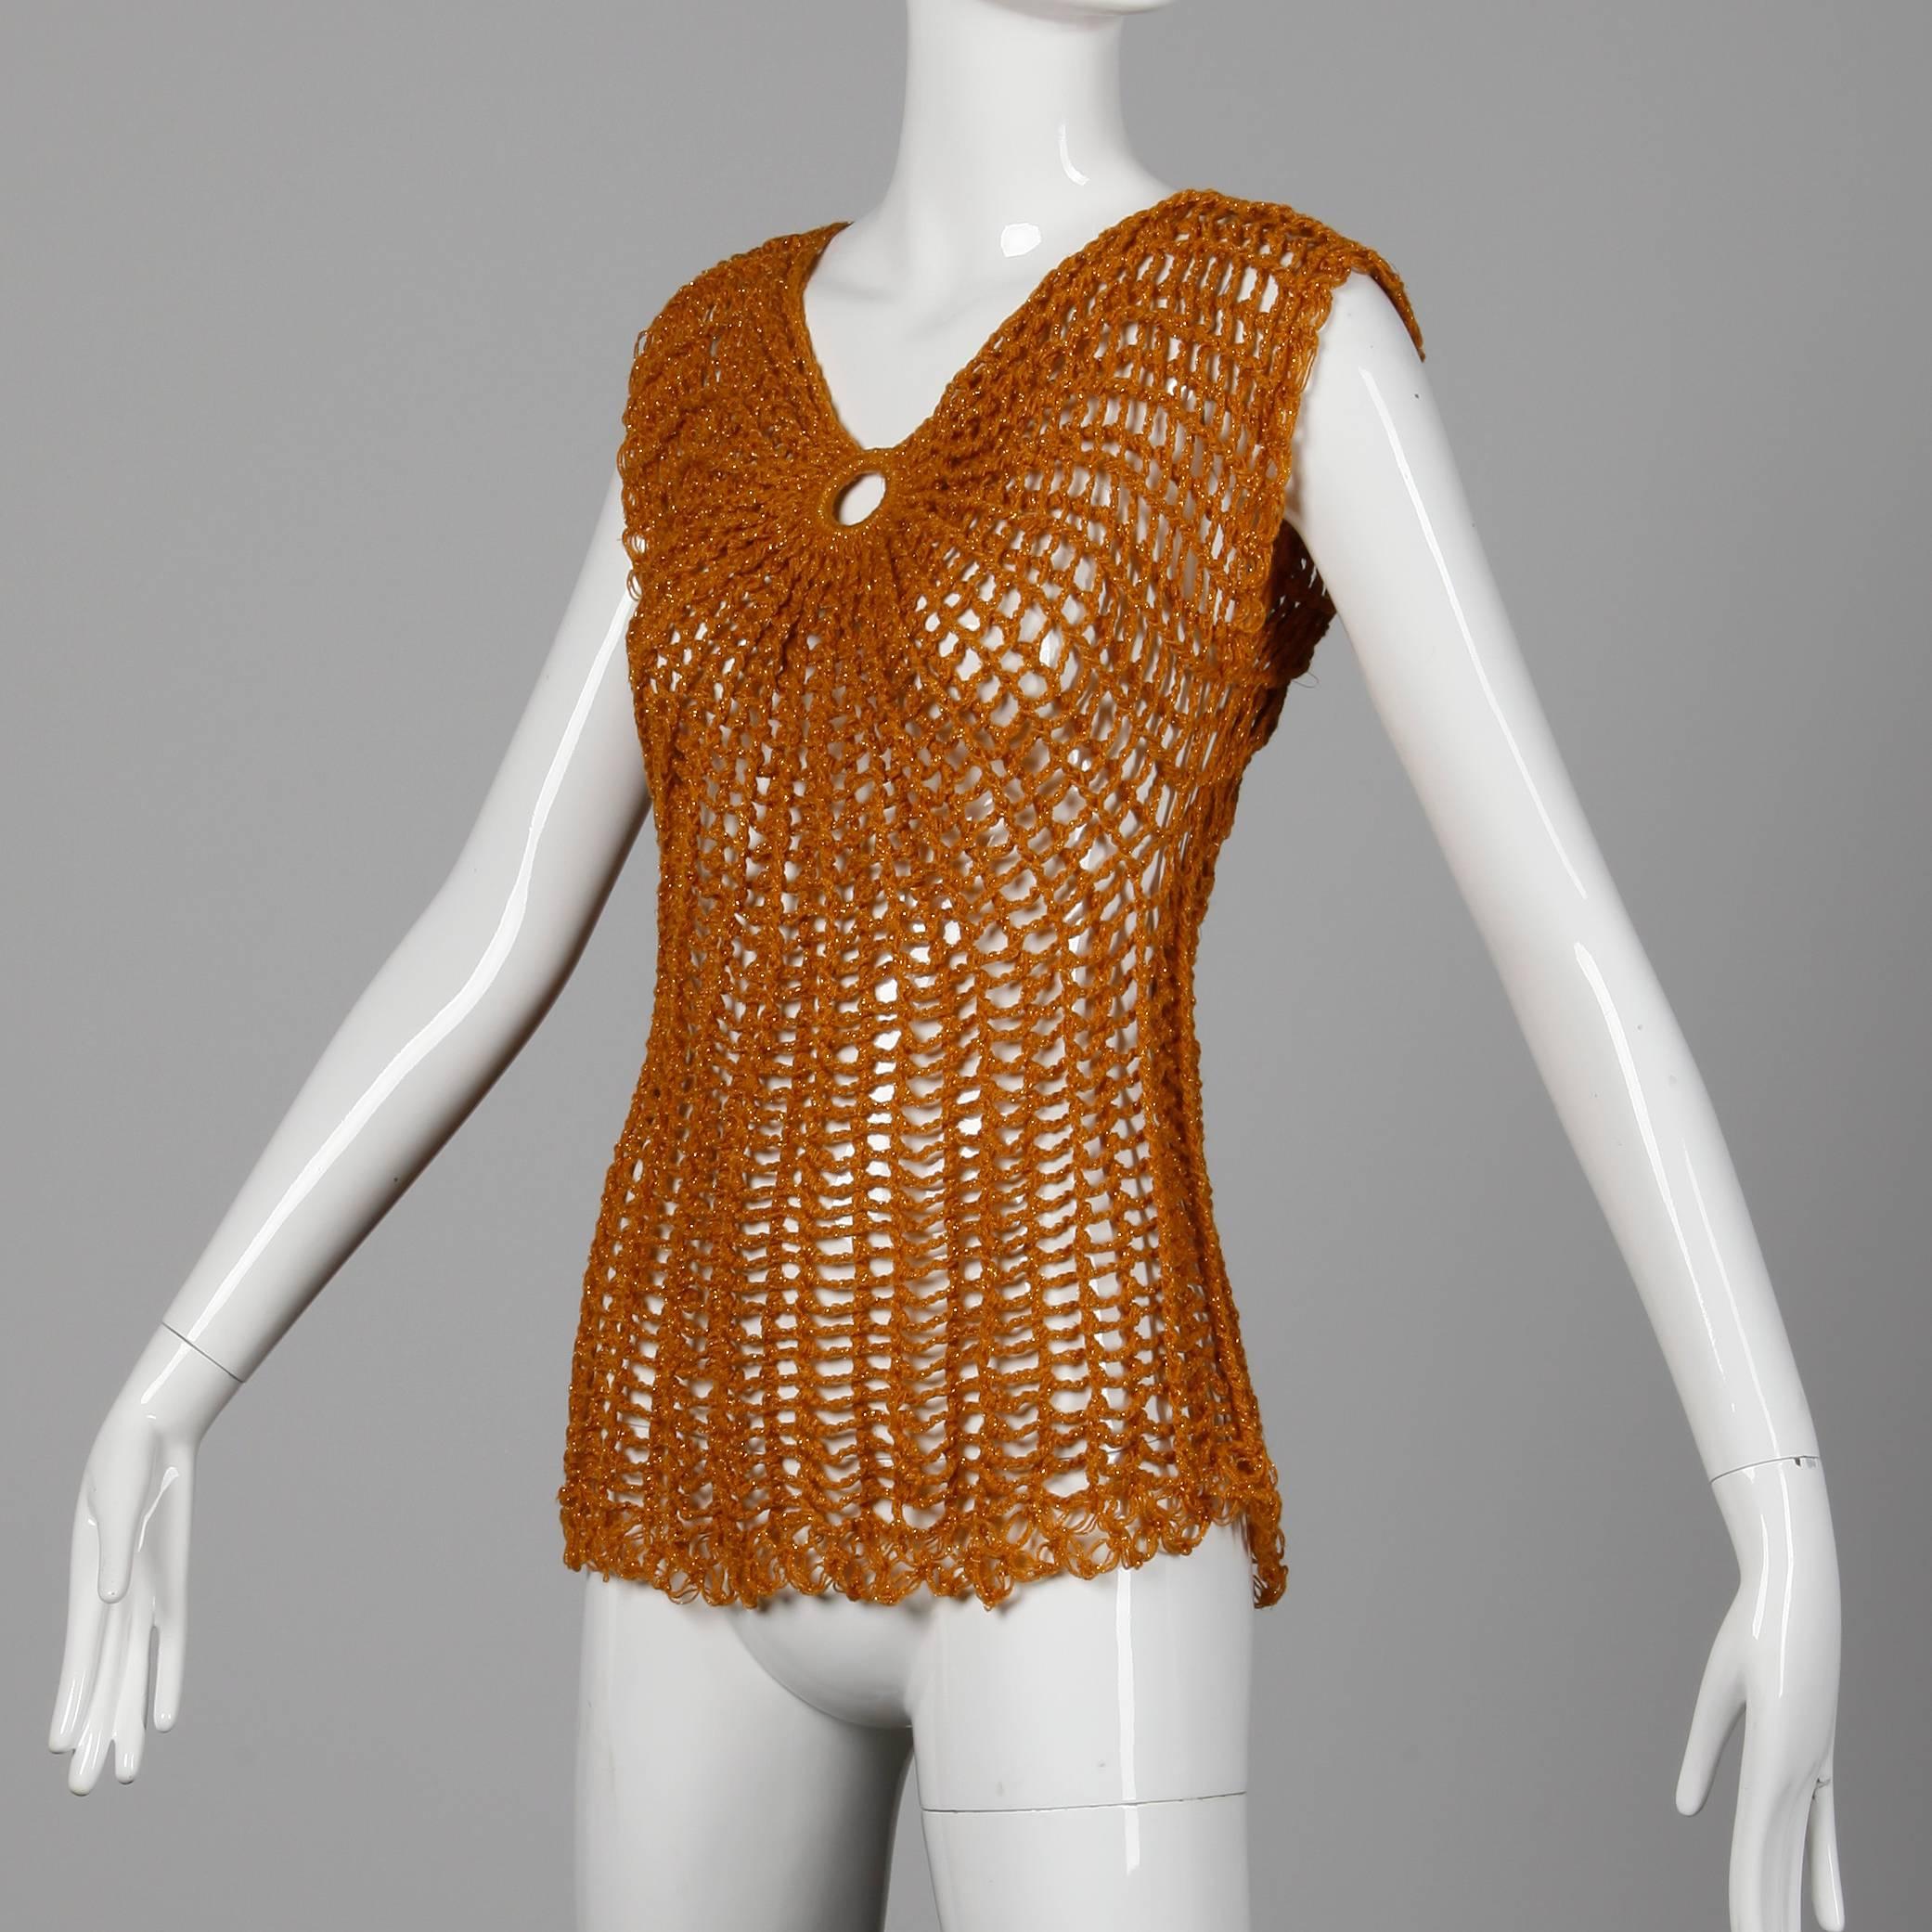 Brown Metallic Gold Vintage Hand Crochet Knit Sweater Top or Shirt, 1970s 